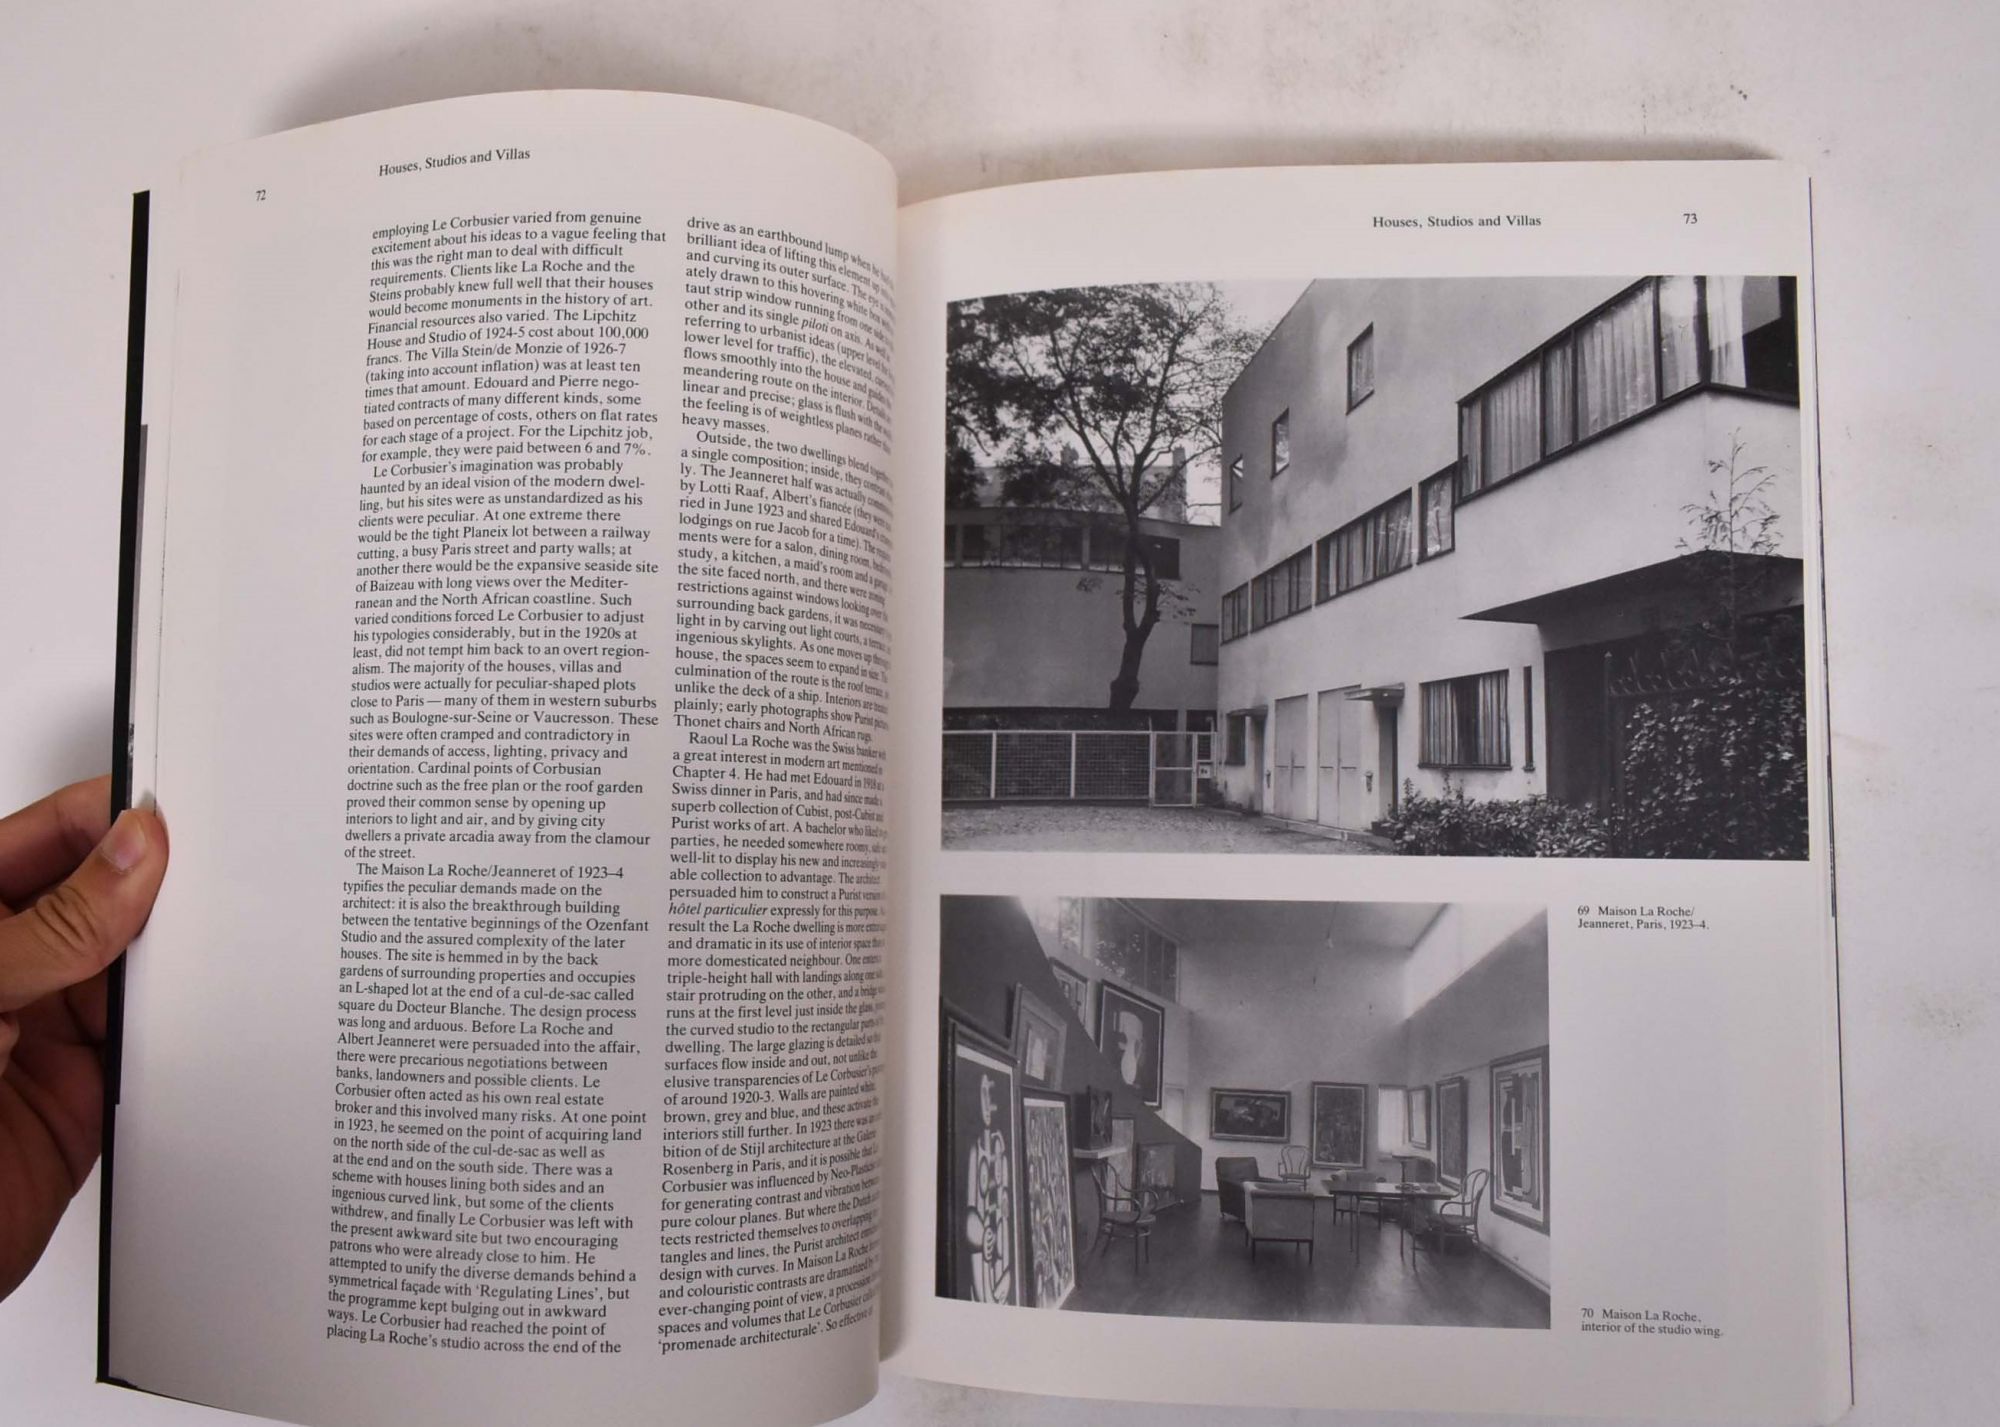 Le Corbusier: Ideas and Forms by William J. R. Curtis on Mullen Books